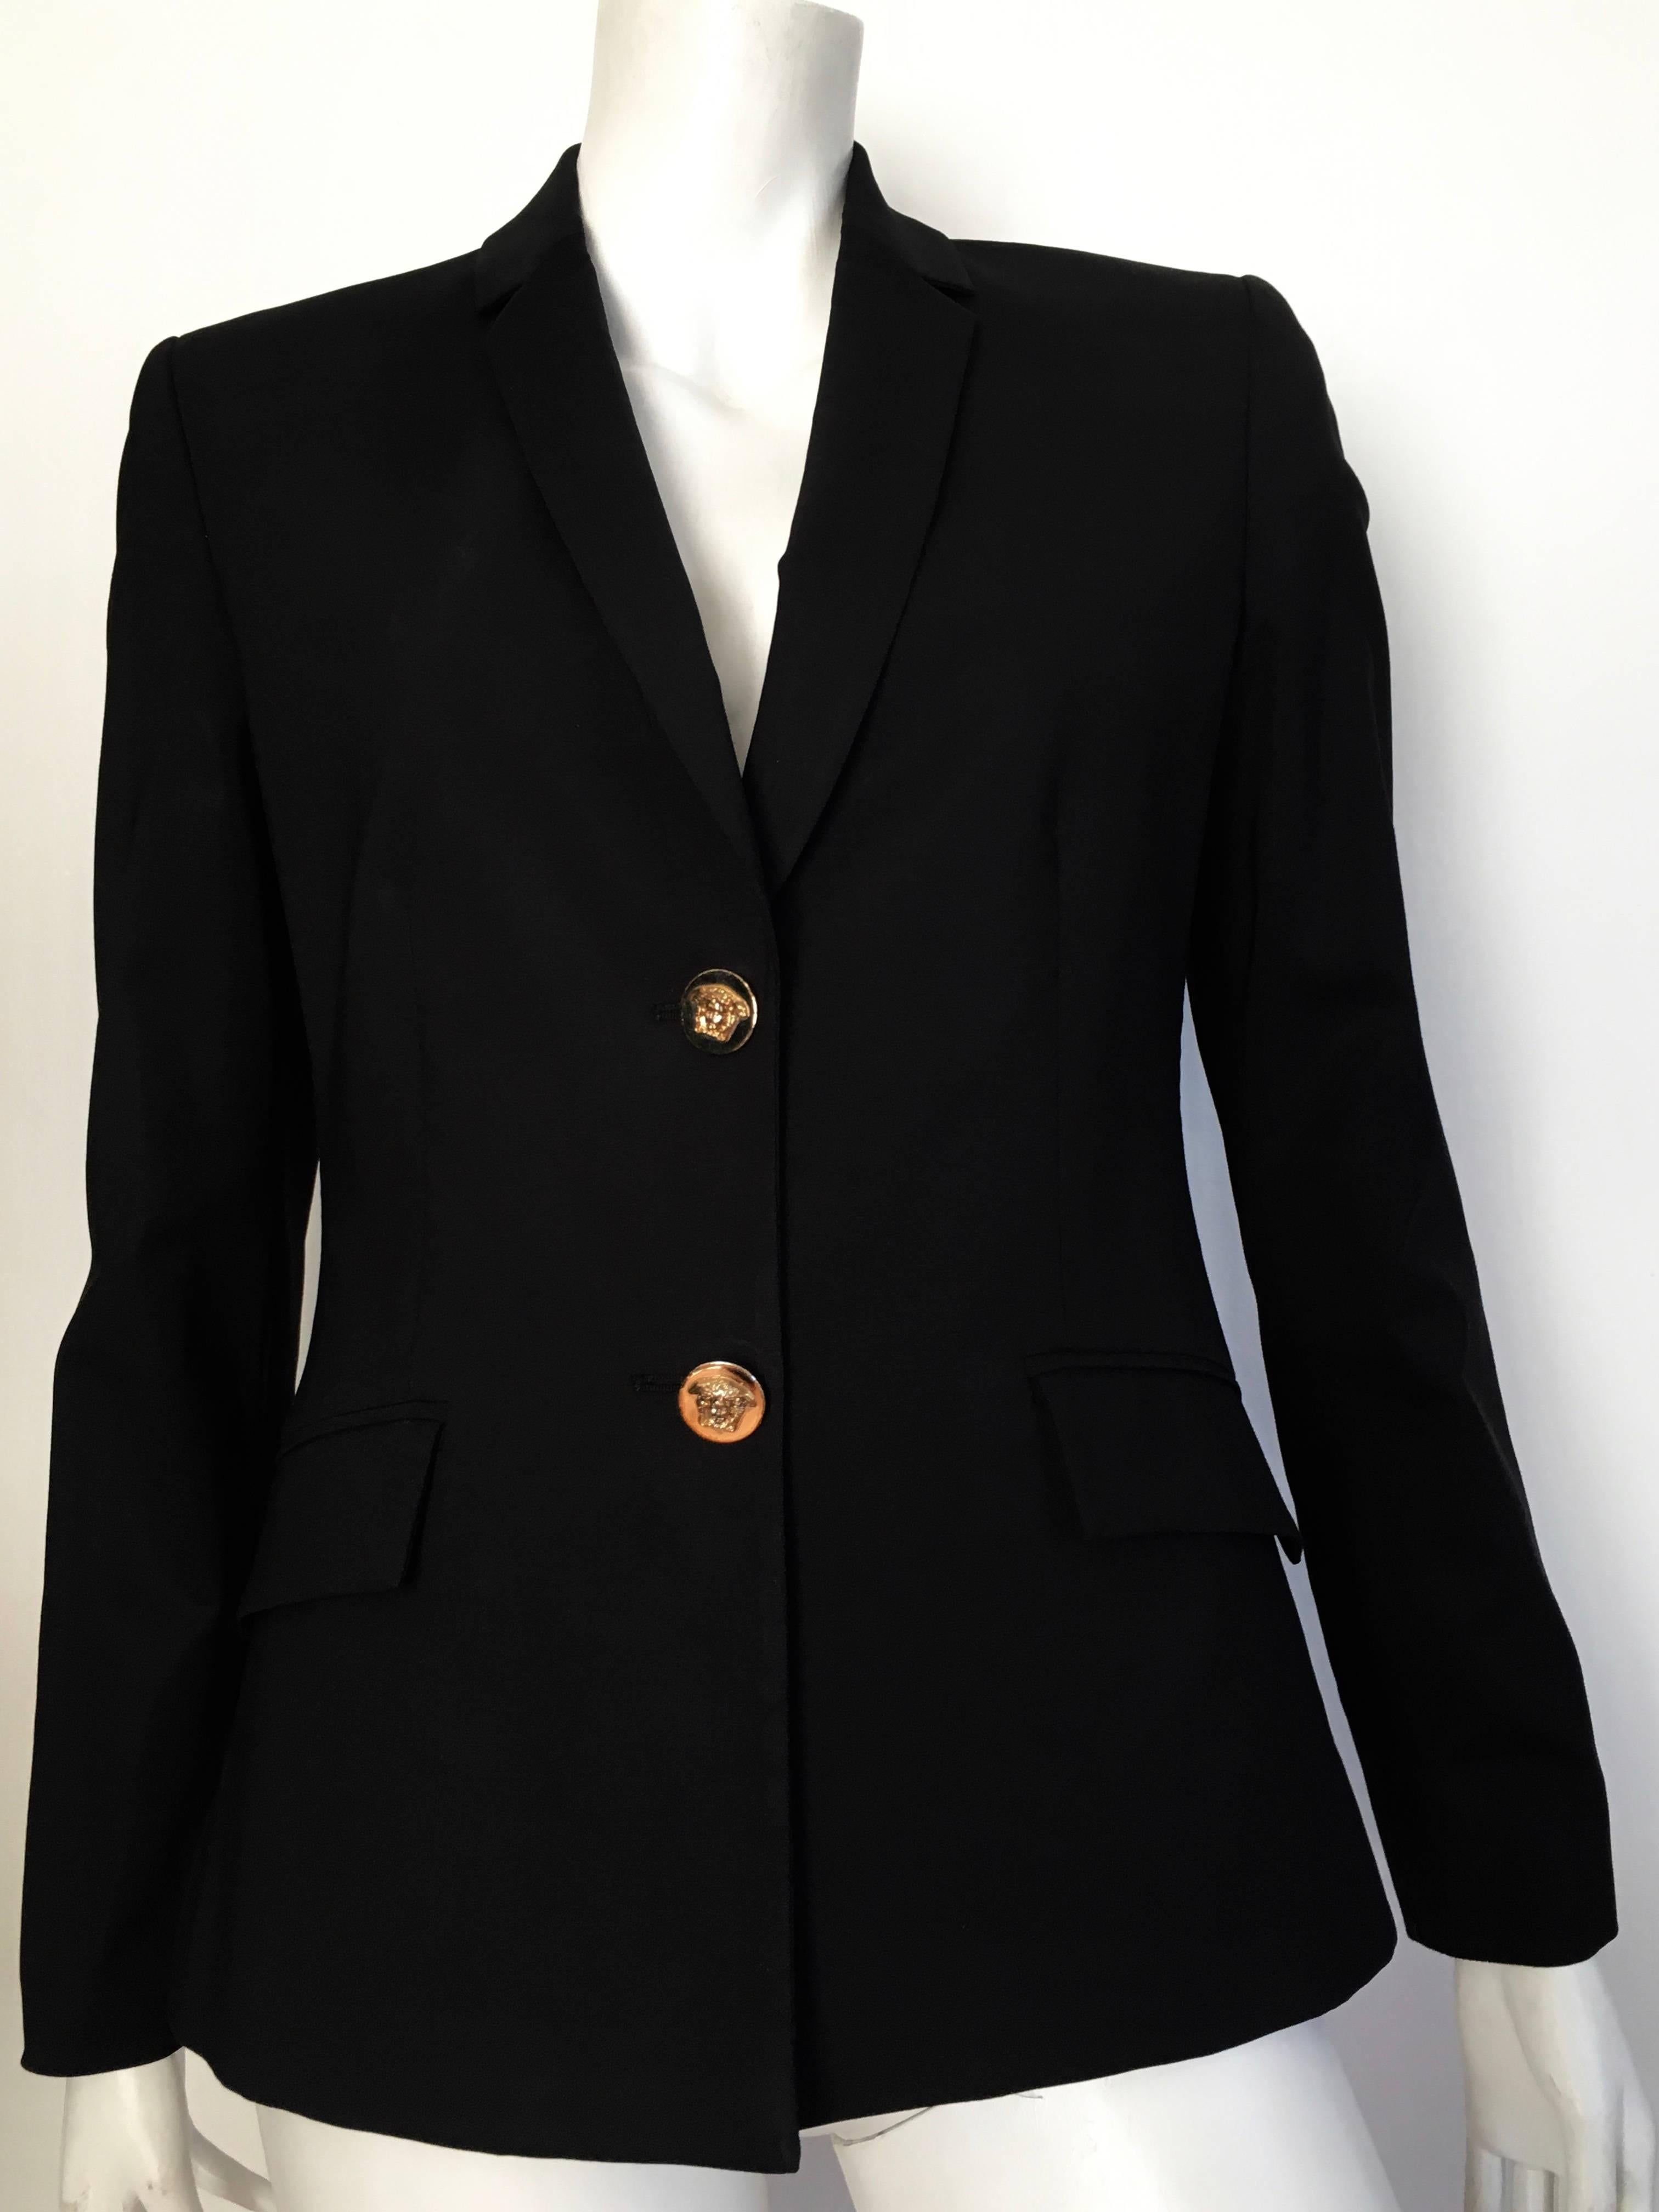 Versace black wool jacket is an Italian size 44 and fits a size  6. There are two gold Medusa front buttons and jacket is lined with iconic Medusa fabric.  Wear this black wool Versace jacket with your 501 Levi's or over your maxi Missoni